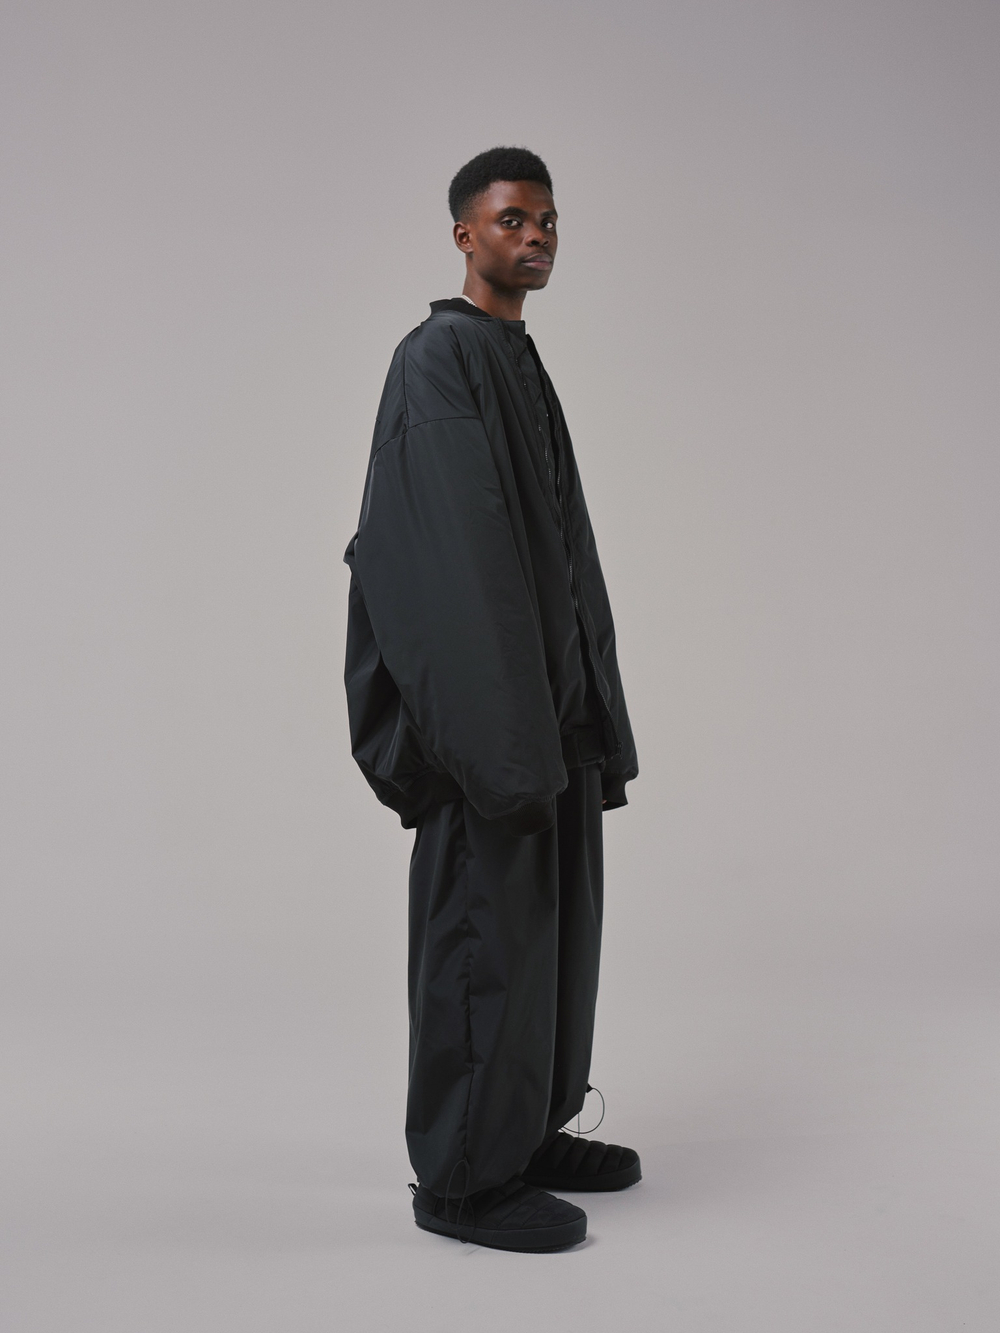 Baggy Trousers [Black]